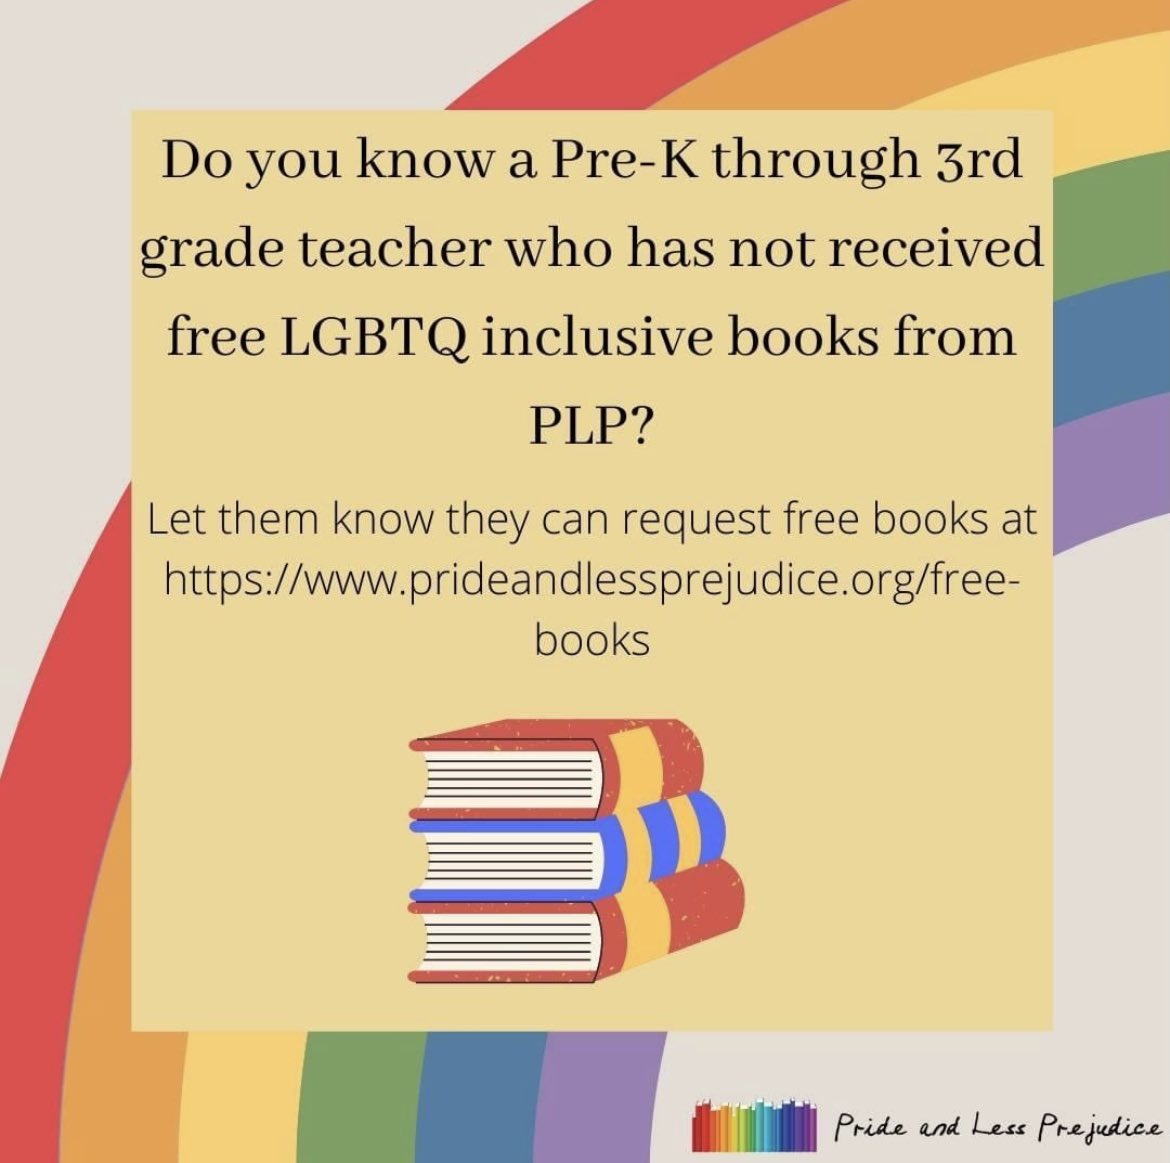 Do you know a Pre-K through 3rd grade teacher who has not received free LGBTQ inclusive books from PLP? 🌈 Let them know they can request free books at prideandlessprejudice.org/free-books 🌈 #freebooks #kidlit #inclusive #lgbtq #elementary #prek #teacher #librarian #nonprofit #readoutproud